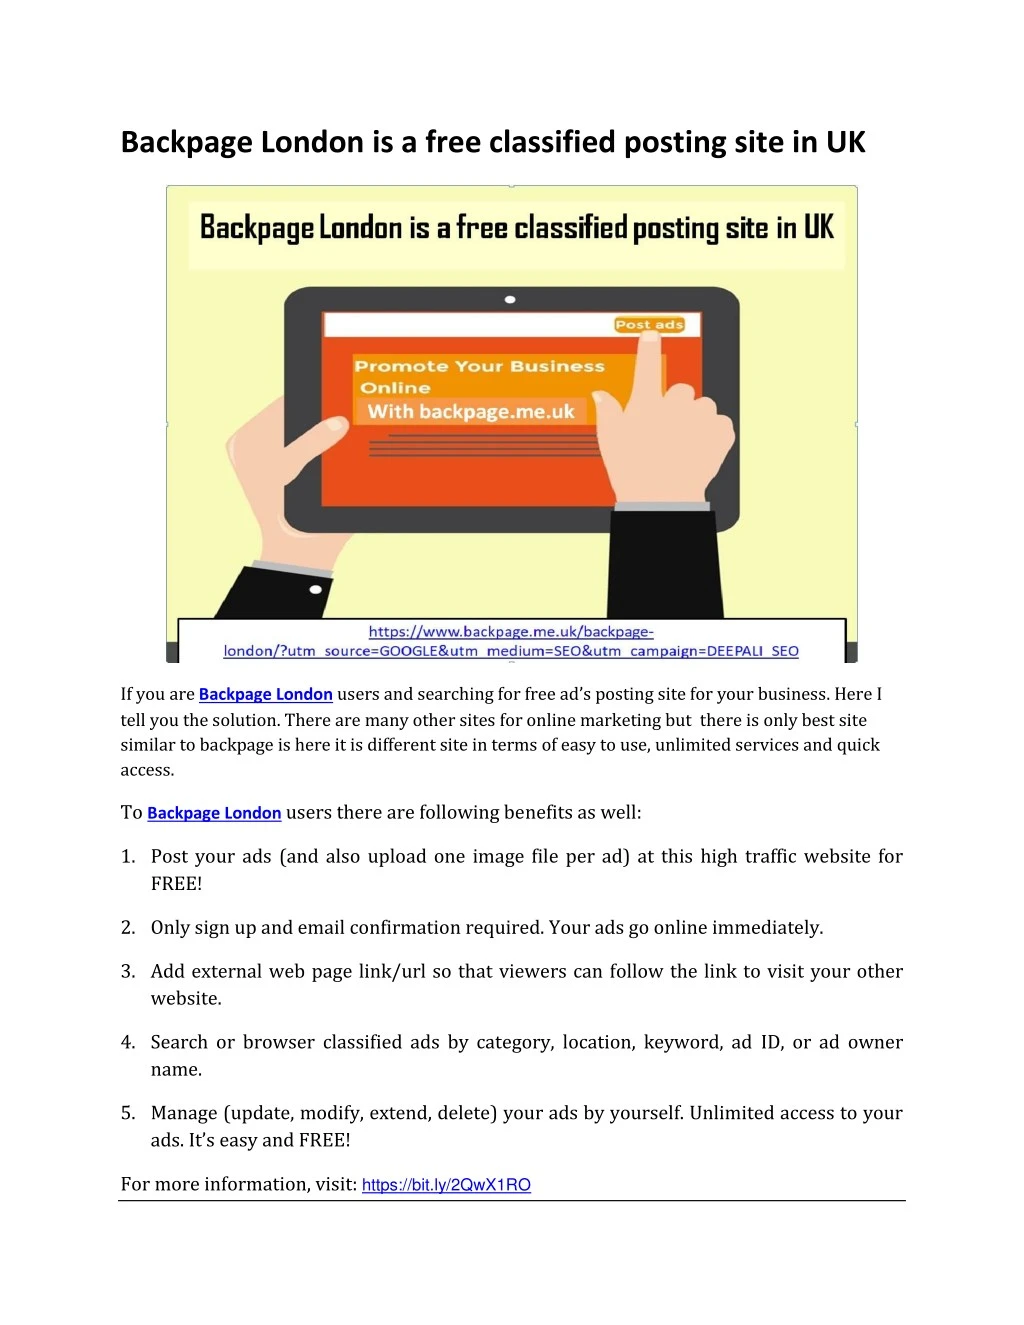 backpage london is a free classified posting site